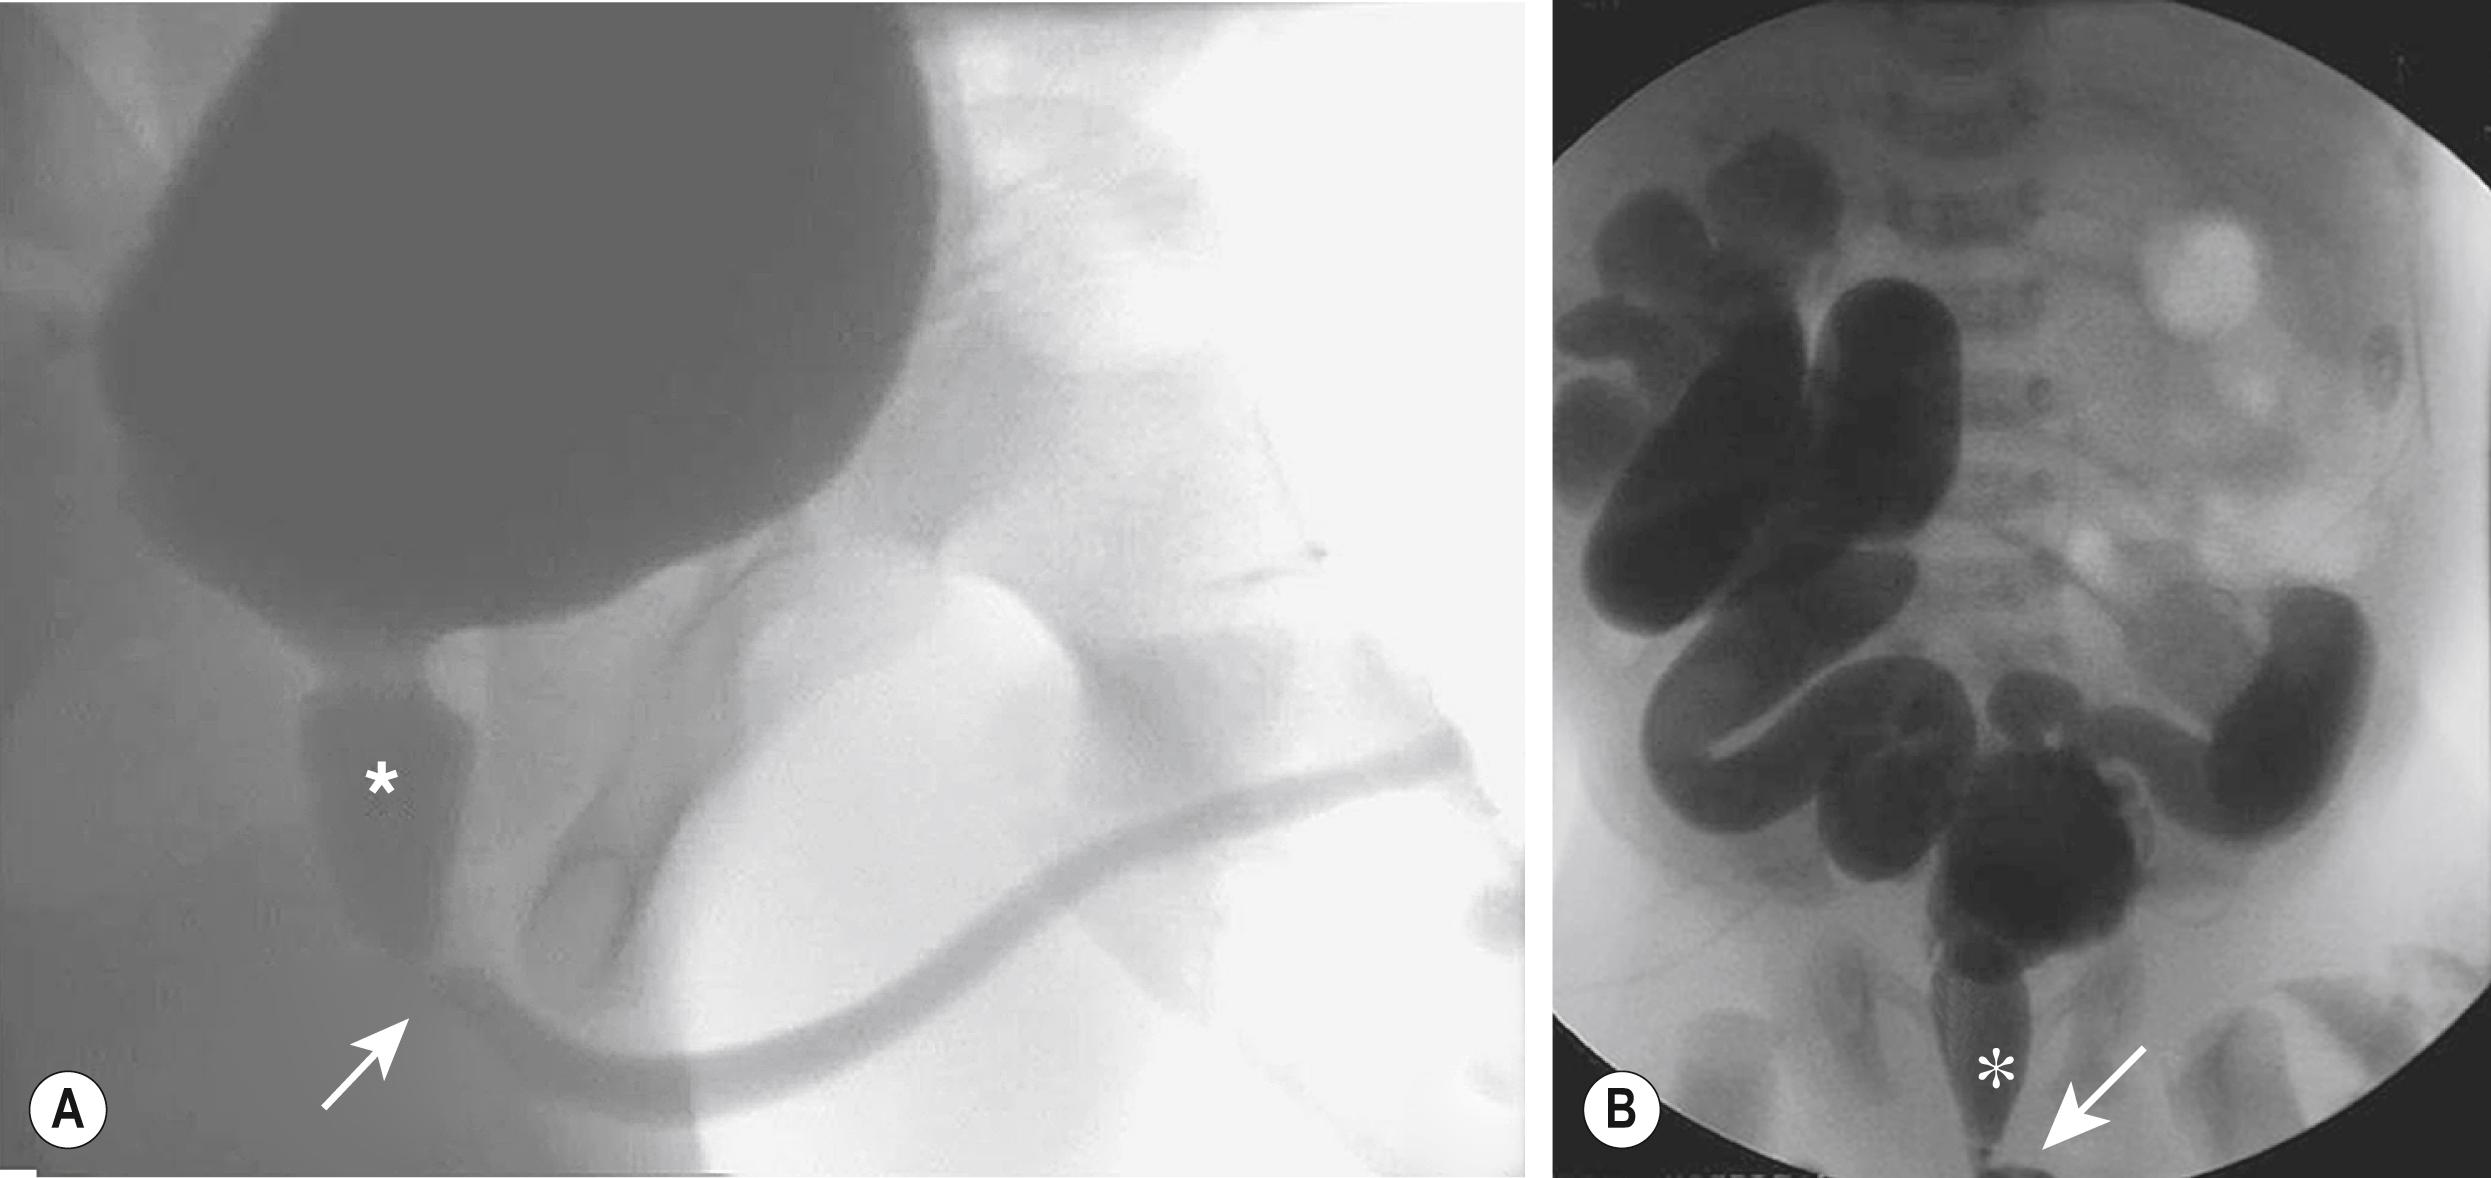 Fig. 57.2, These two voiding cystourethrograms show varying degrees of obstruction from posterior urethral valves. In both studies the location of the valves is marked with an arrow and the posterior urethra is identified with an asterisk. (A) There is no evidence of vesicoureteral reflux. (B) There is massive, bilateral grade V reflux.